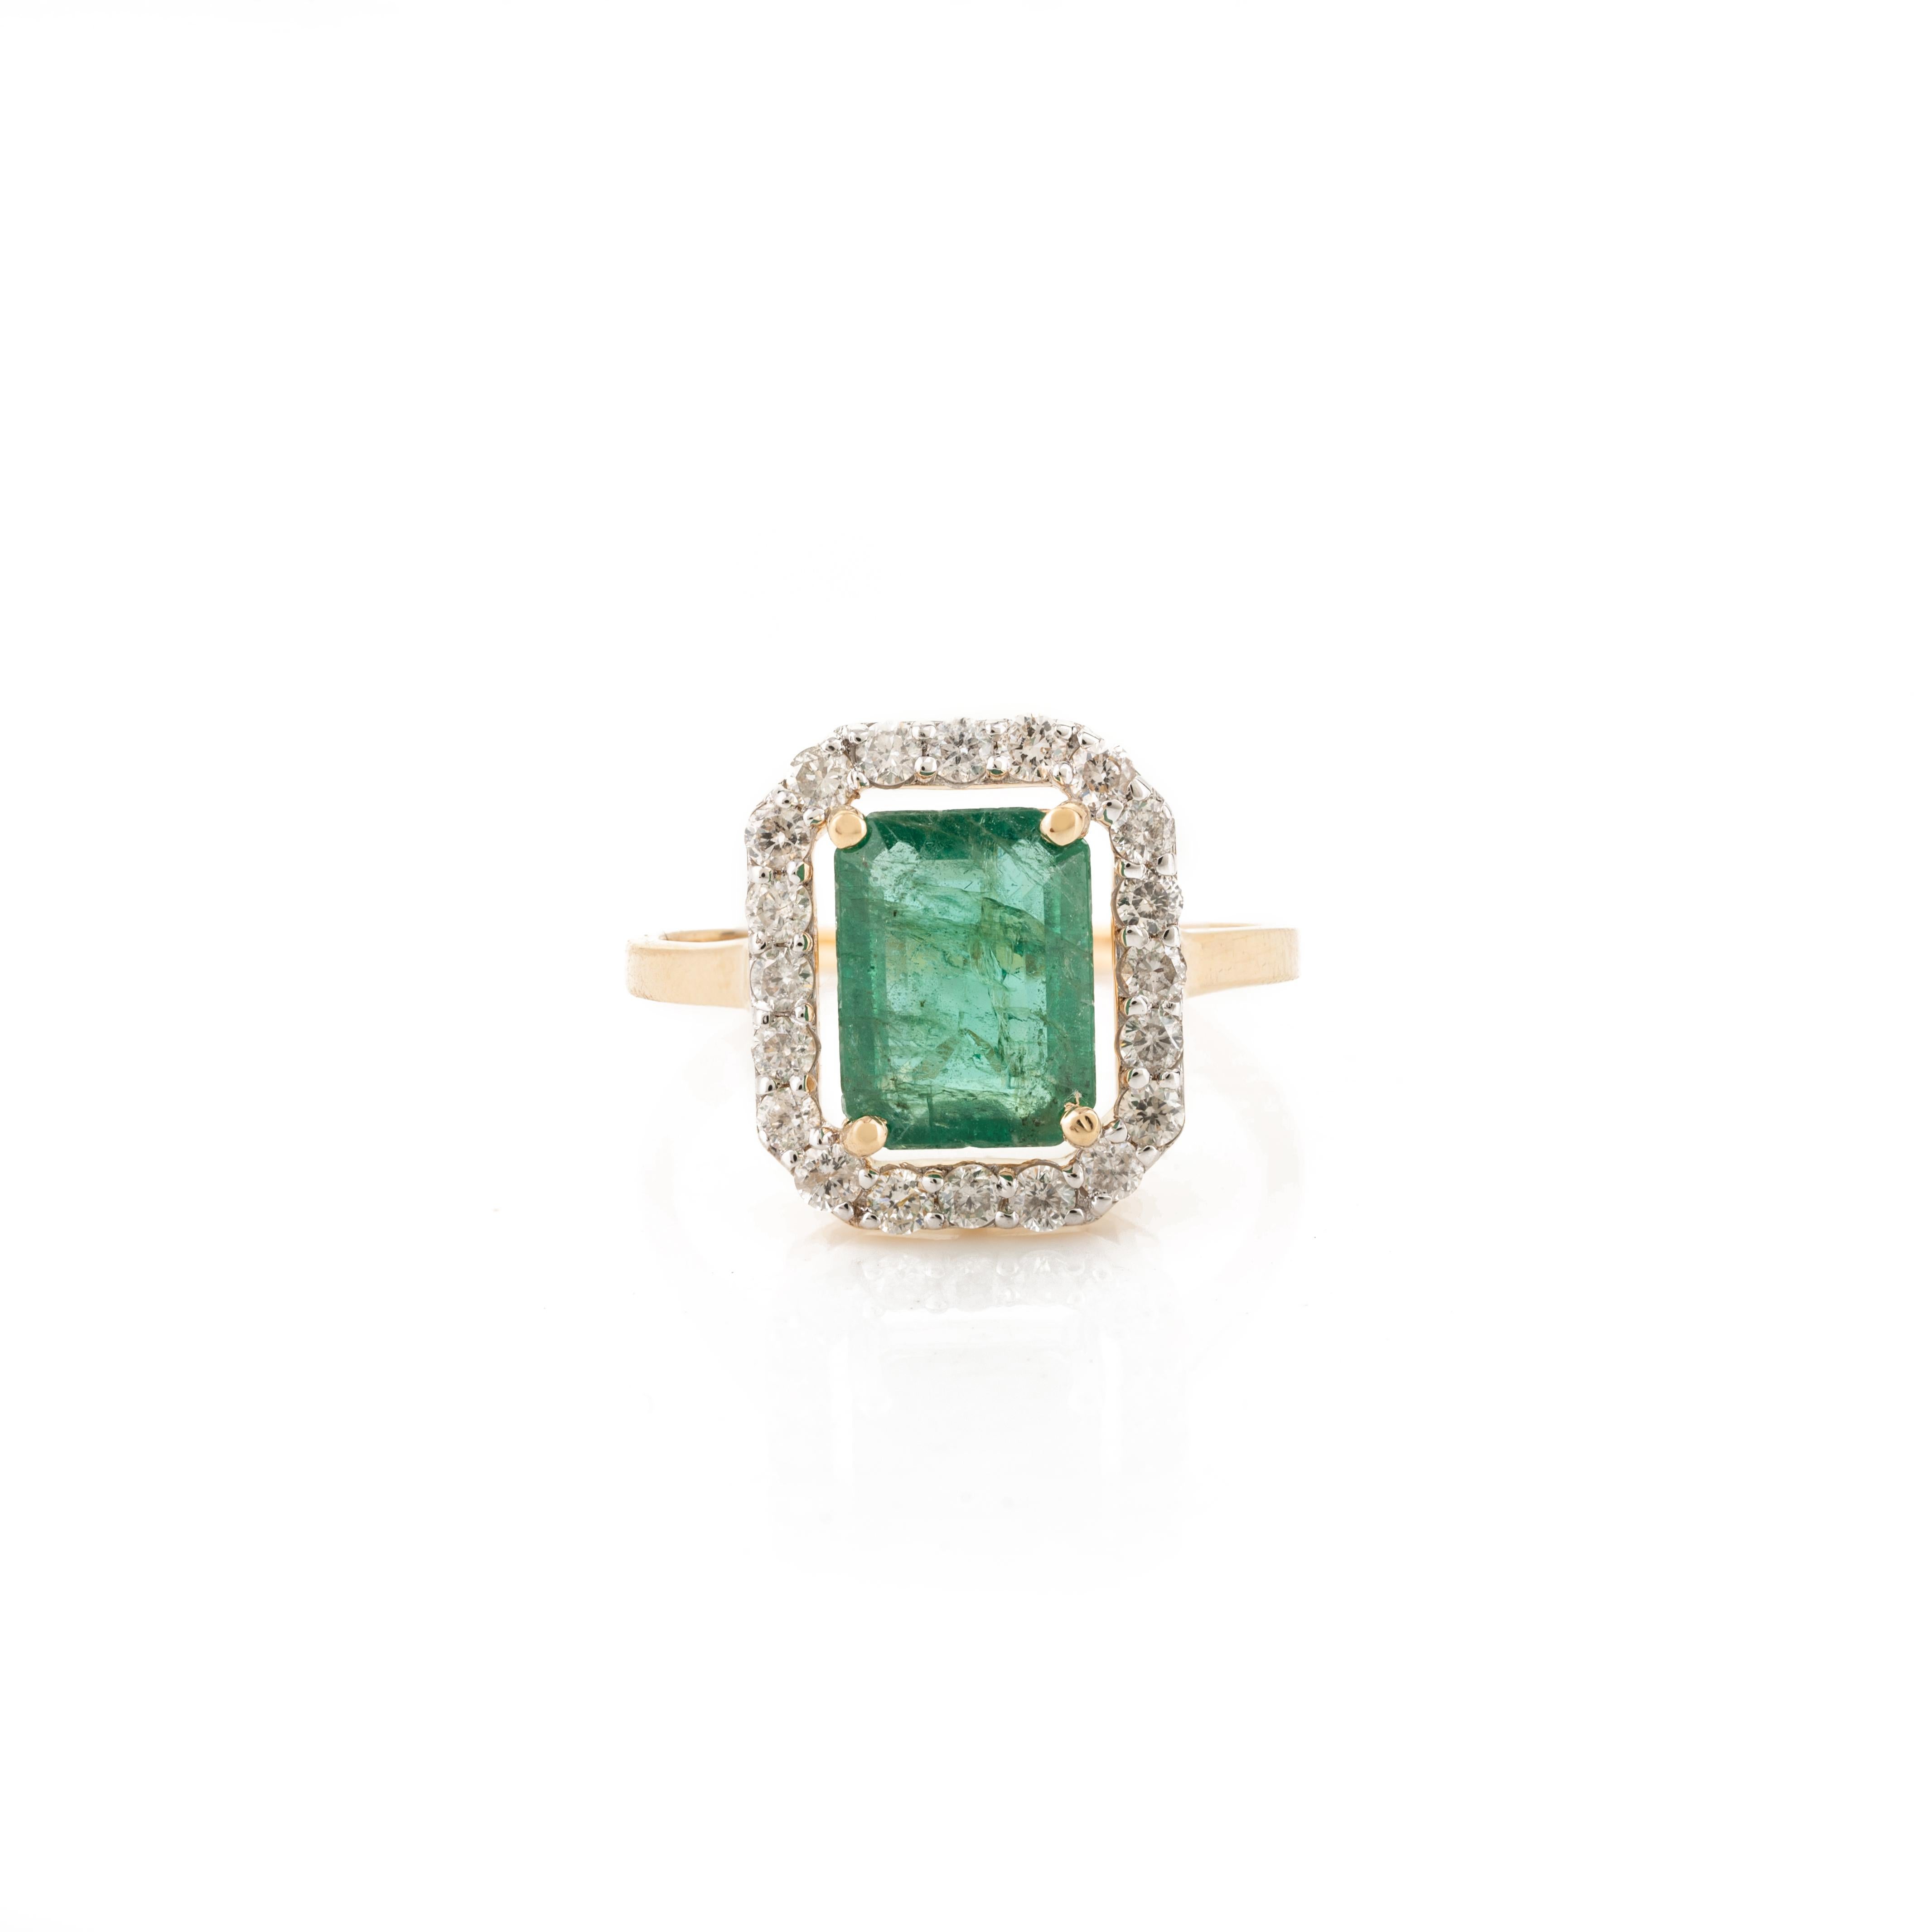 For Sale:  Rare Green Emerald Diamond Halo Engagement Ring in 18k Solid Yellow Gold 3